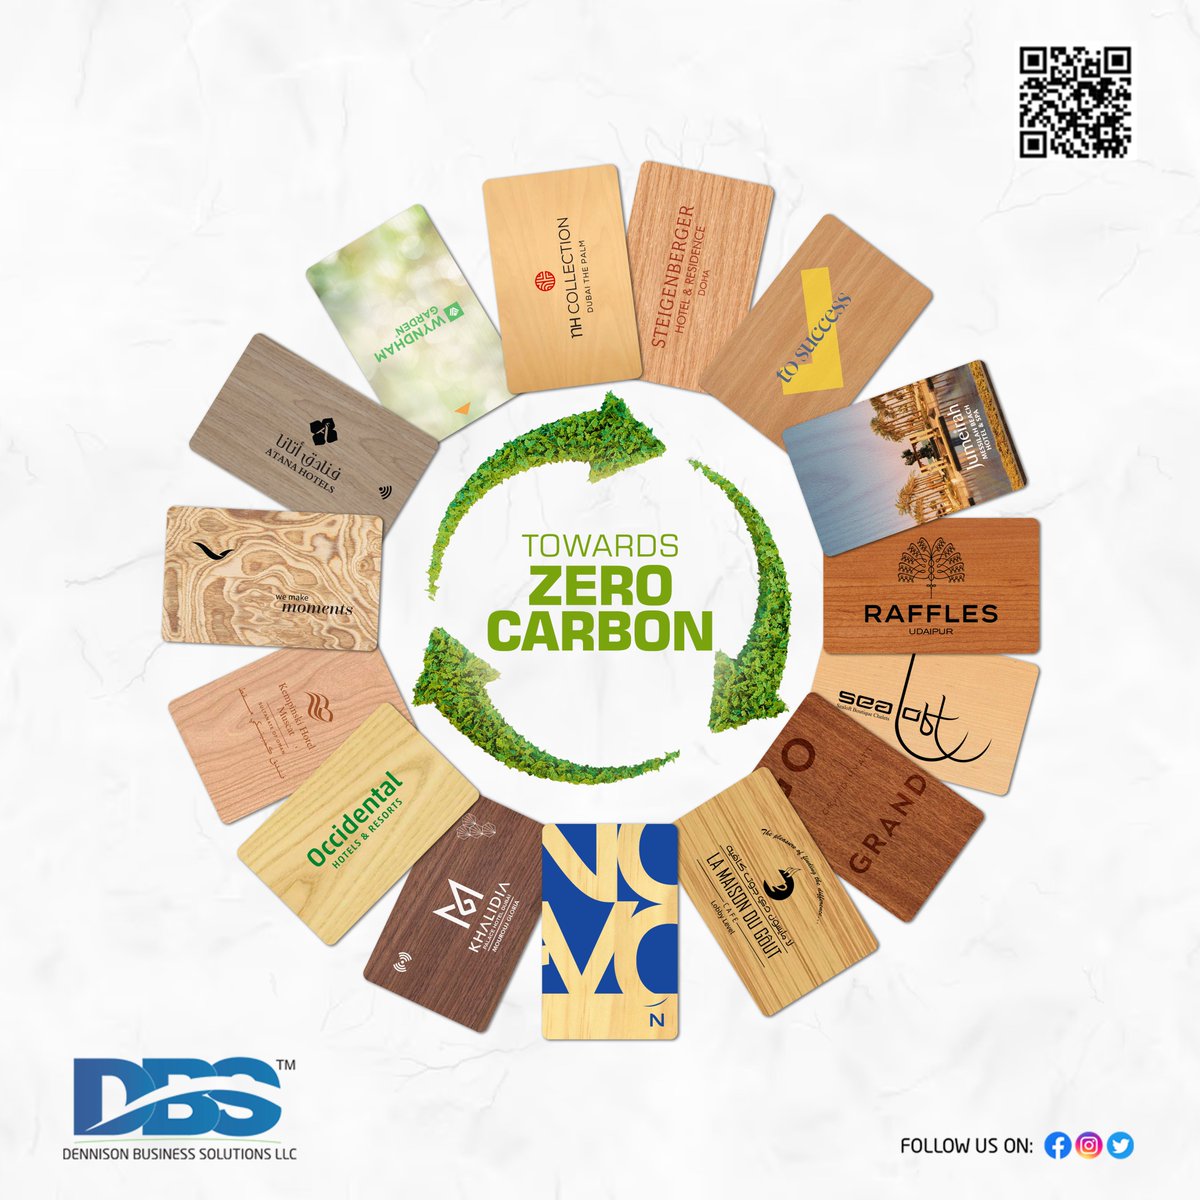 FOR MORE INFO :-
+971 4 236 8426 | info@pvc-cards.biz

#greenfuture #biodegradablecards #woodenrfid #woodencard #ecorfid #biodegradablekeys #woodenhotelkeycard #greenkeycard #ecofriendlycards